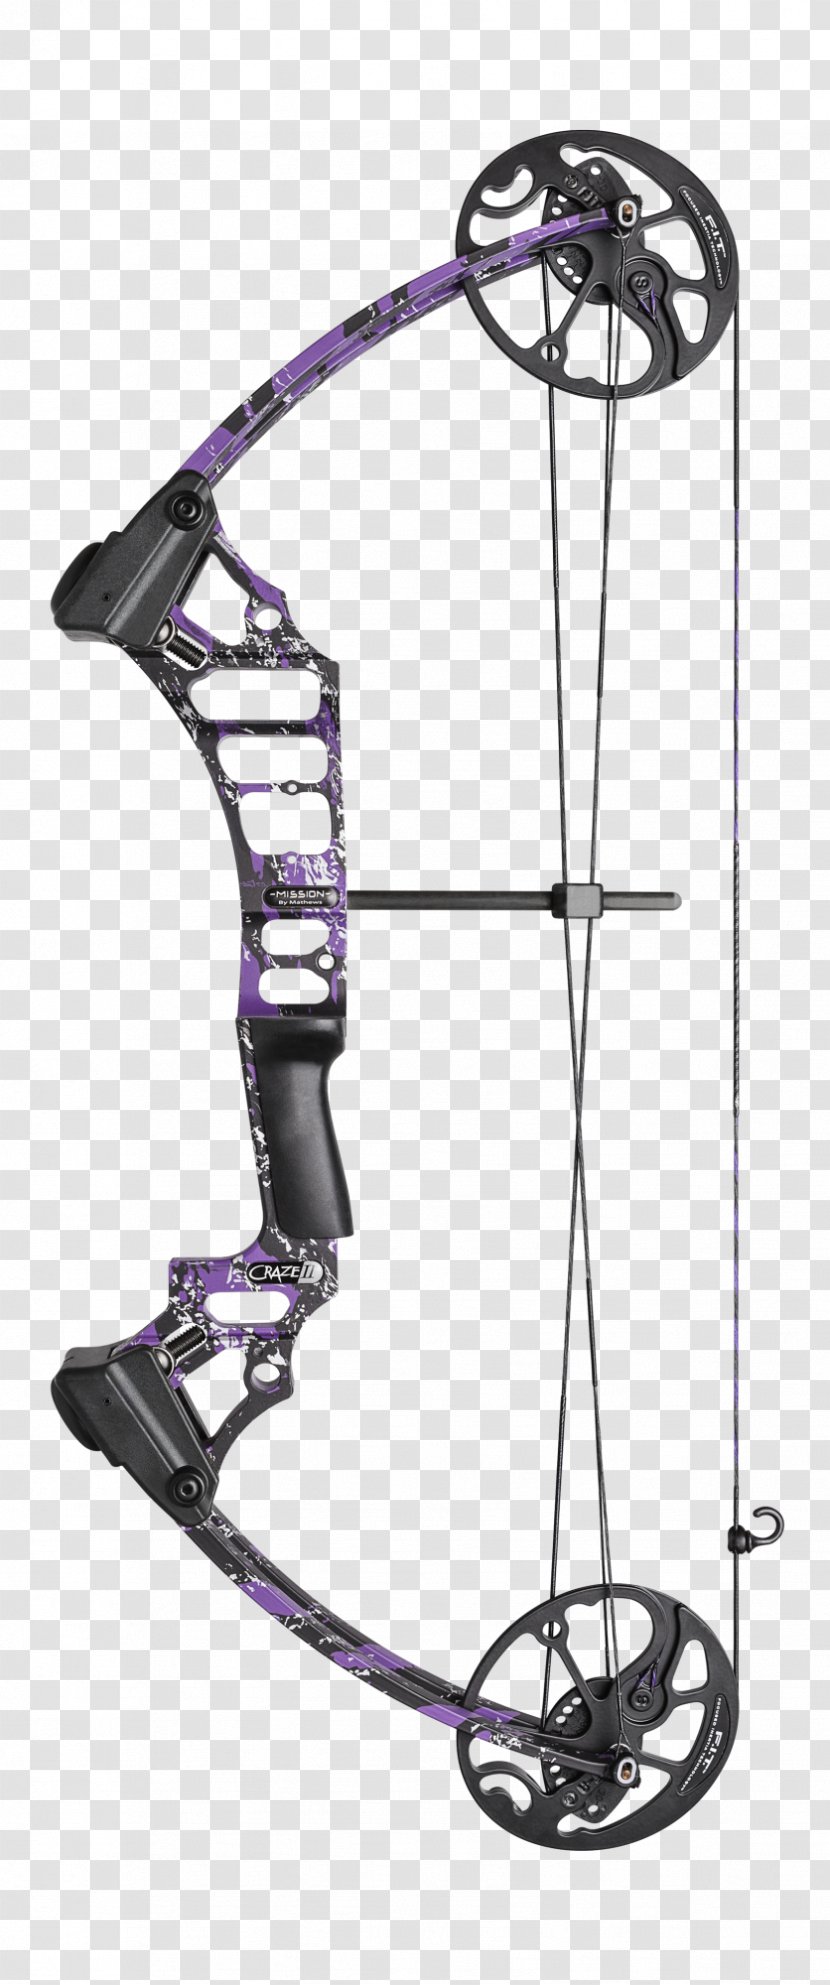 Archery Compound Bows Hunting Bow And Arrow Shooting - Mission Force One Transparent PNG